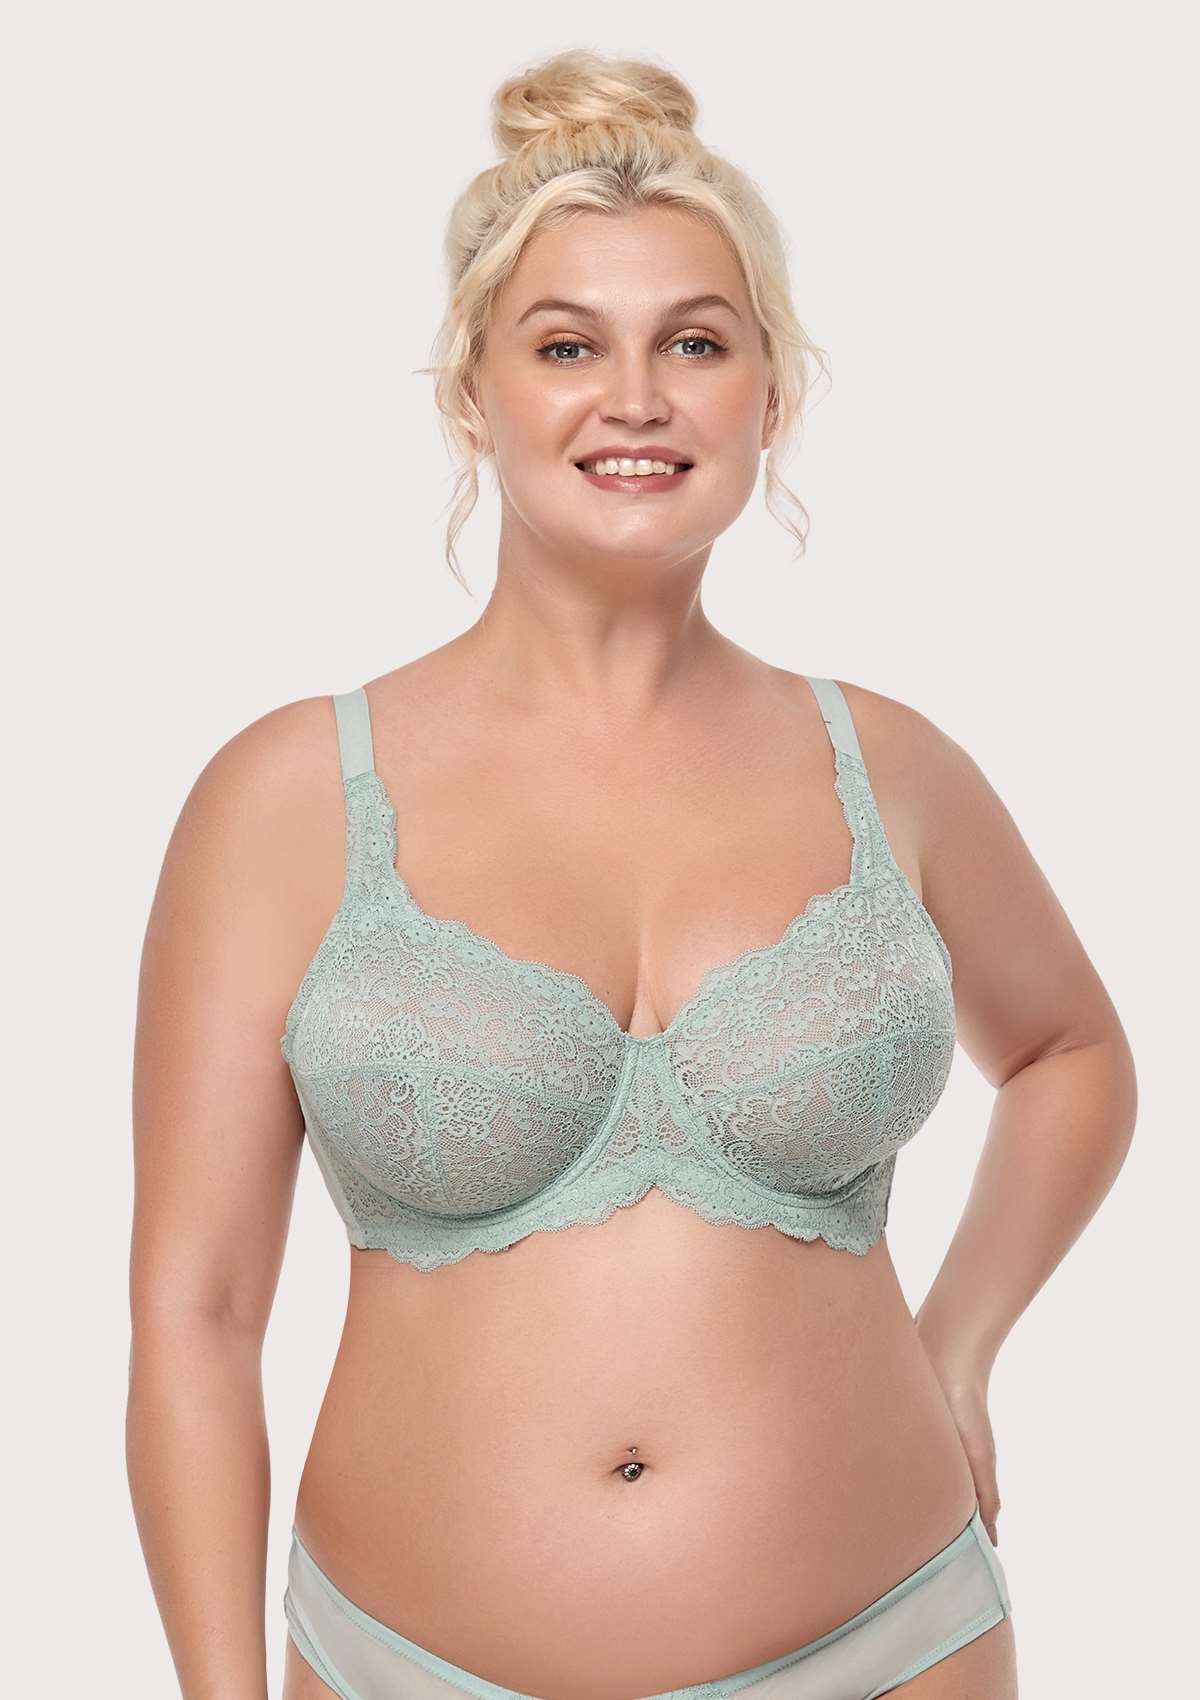 HSIA All-Over Floral Lace: Best Bra For Elderly With Sagging Breasts - Pewter Blue / 36 / DD/E